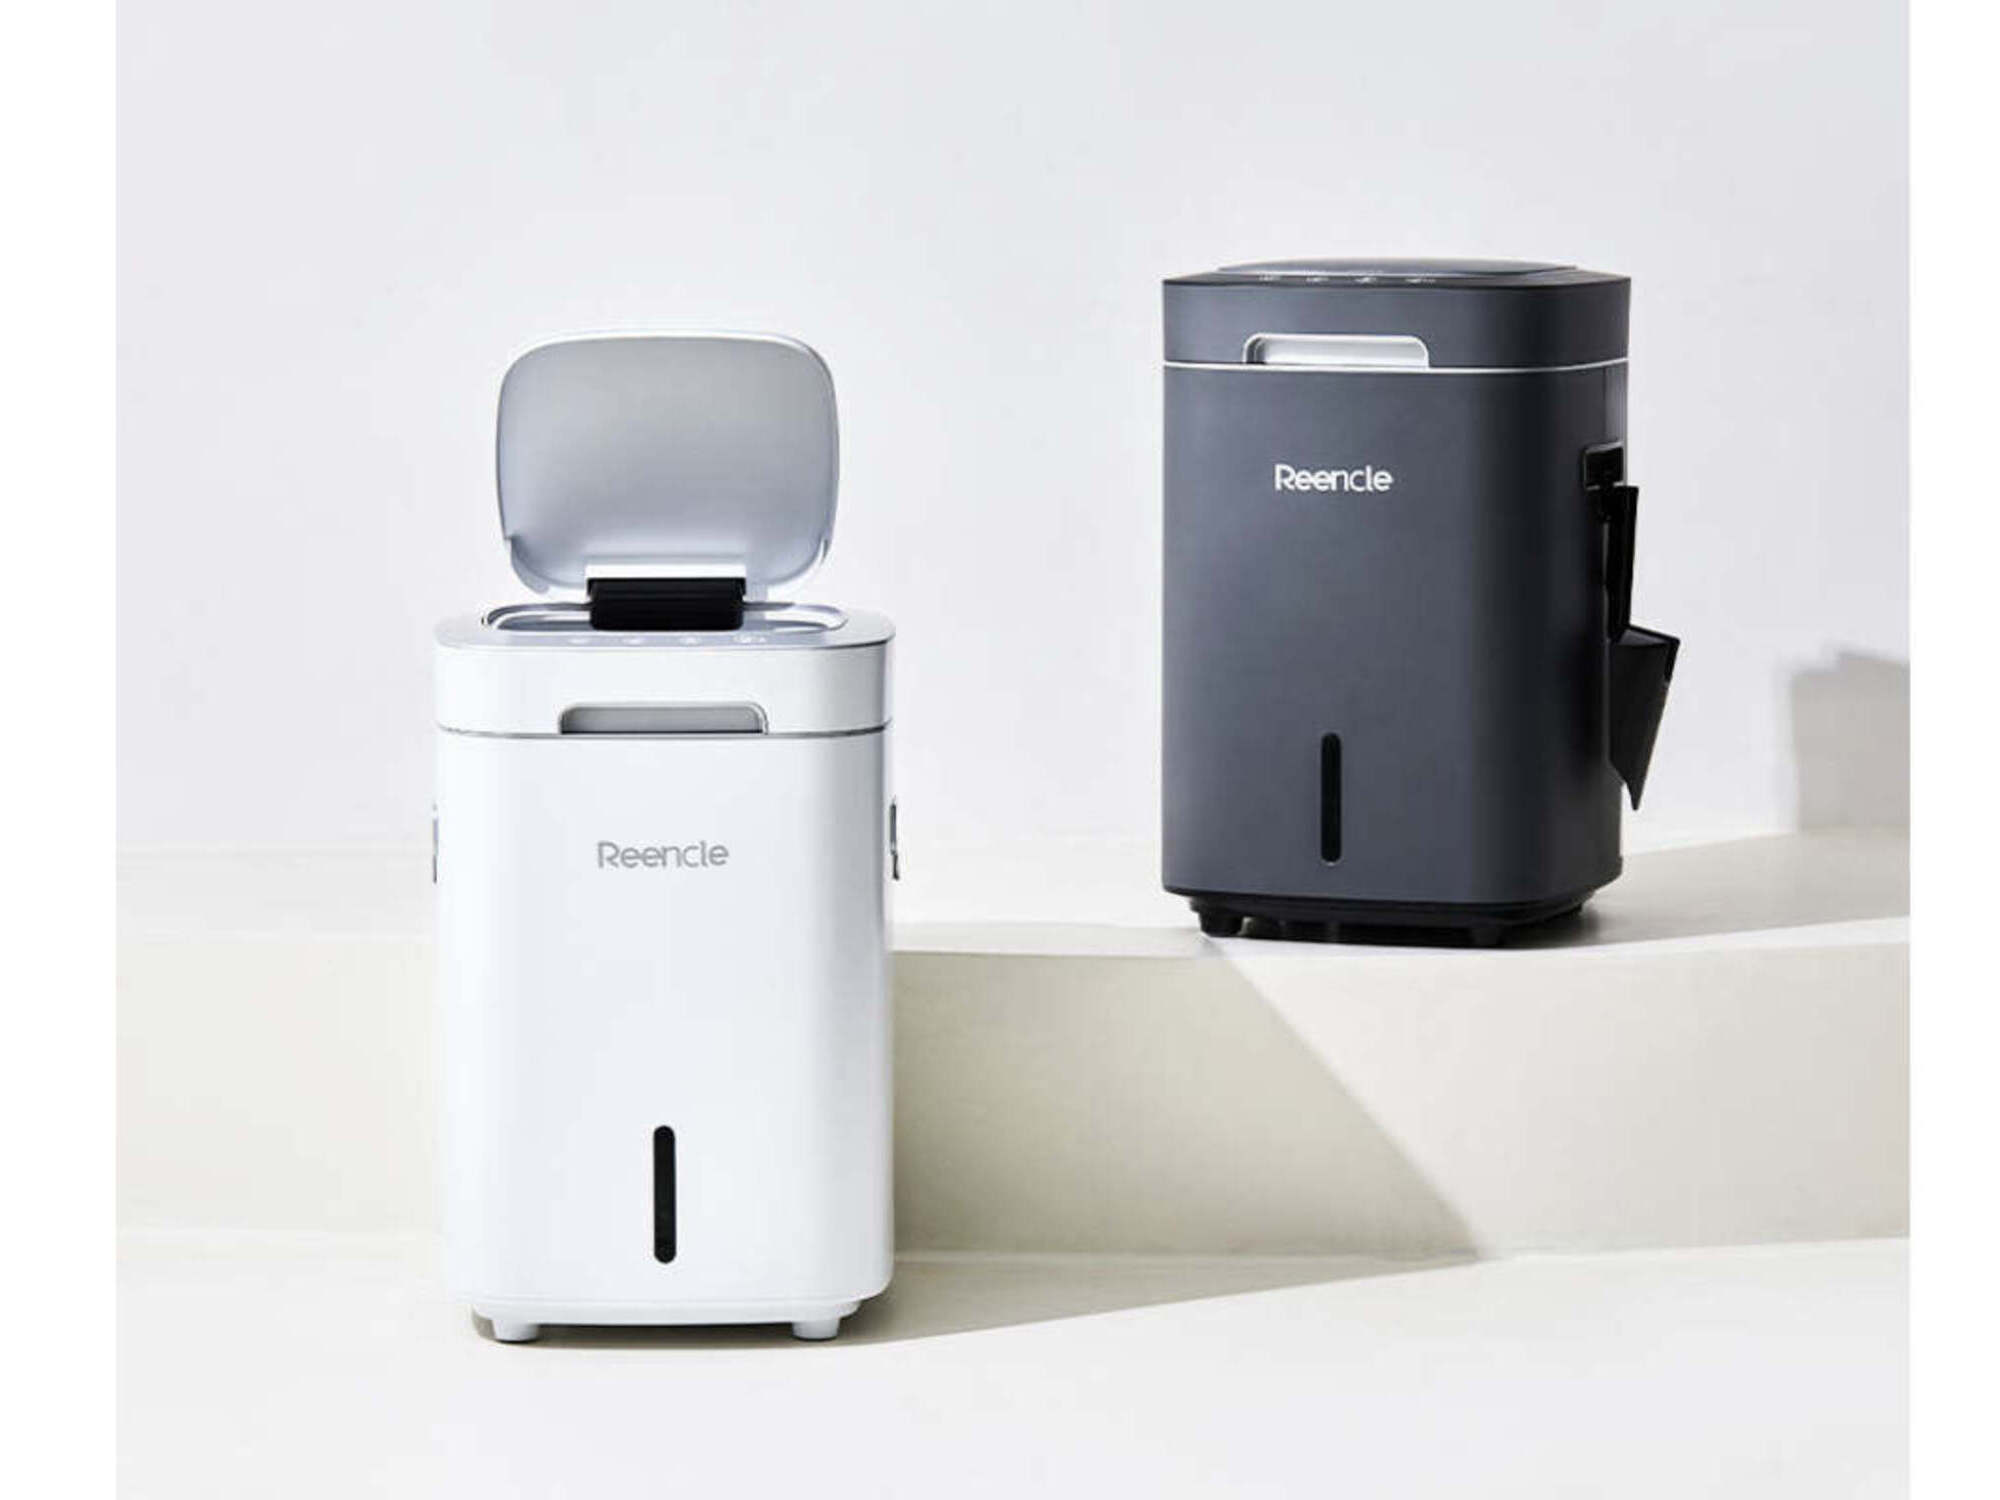 Food waste is out of style—try this gadget instead